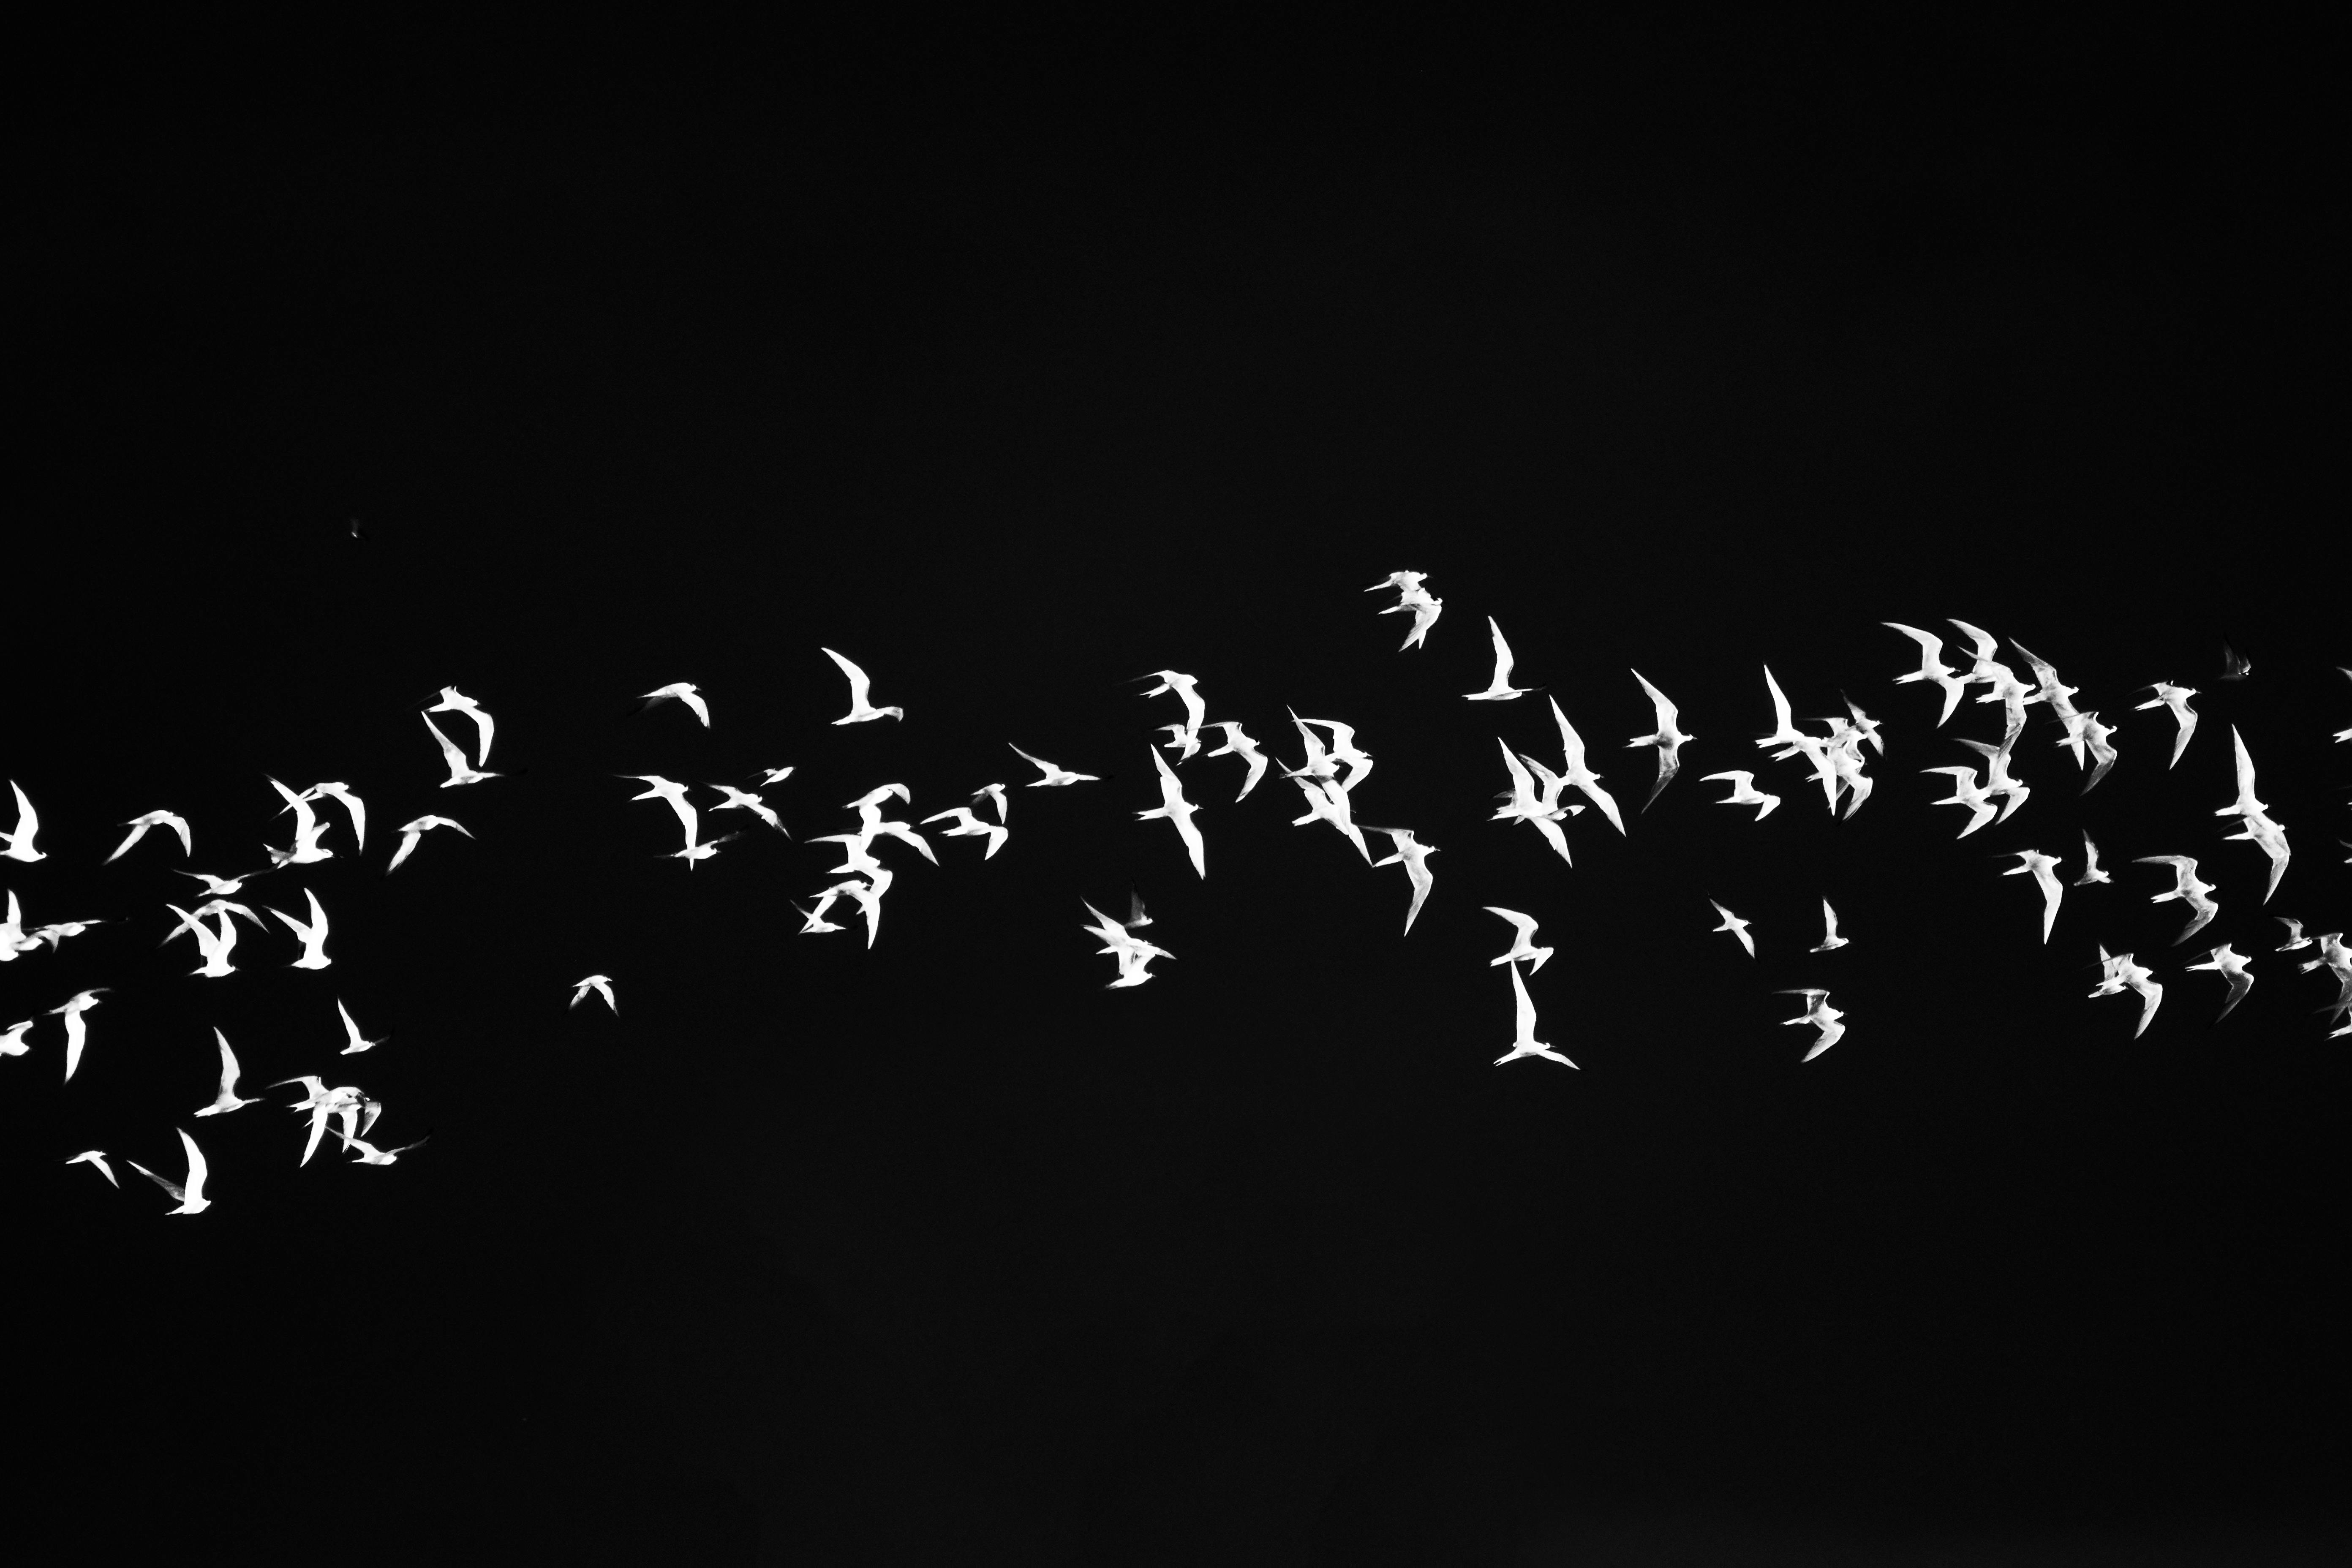 Flock of White Birds Against a Black Background · Free Stock Photo